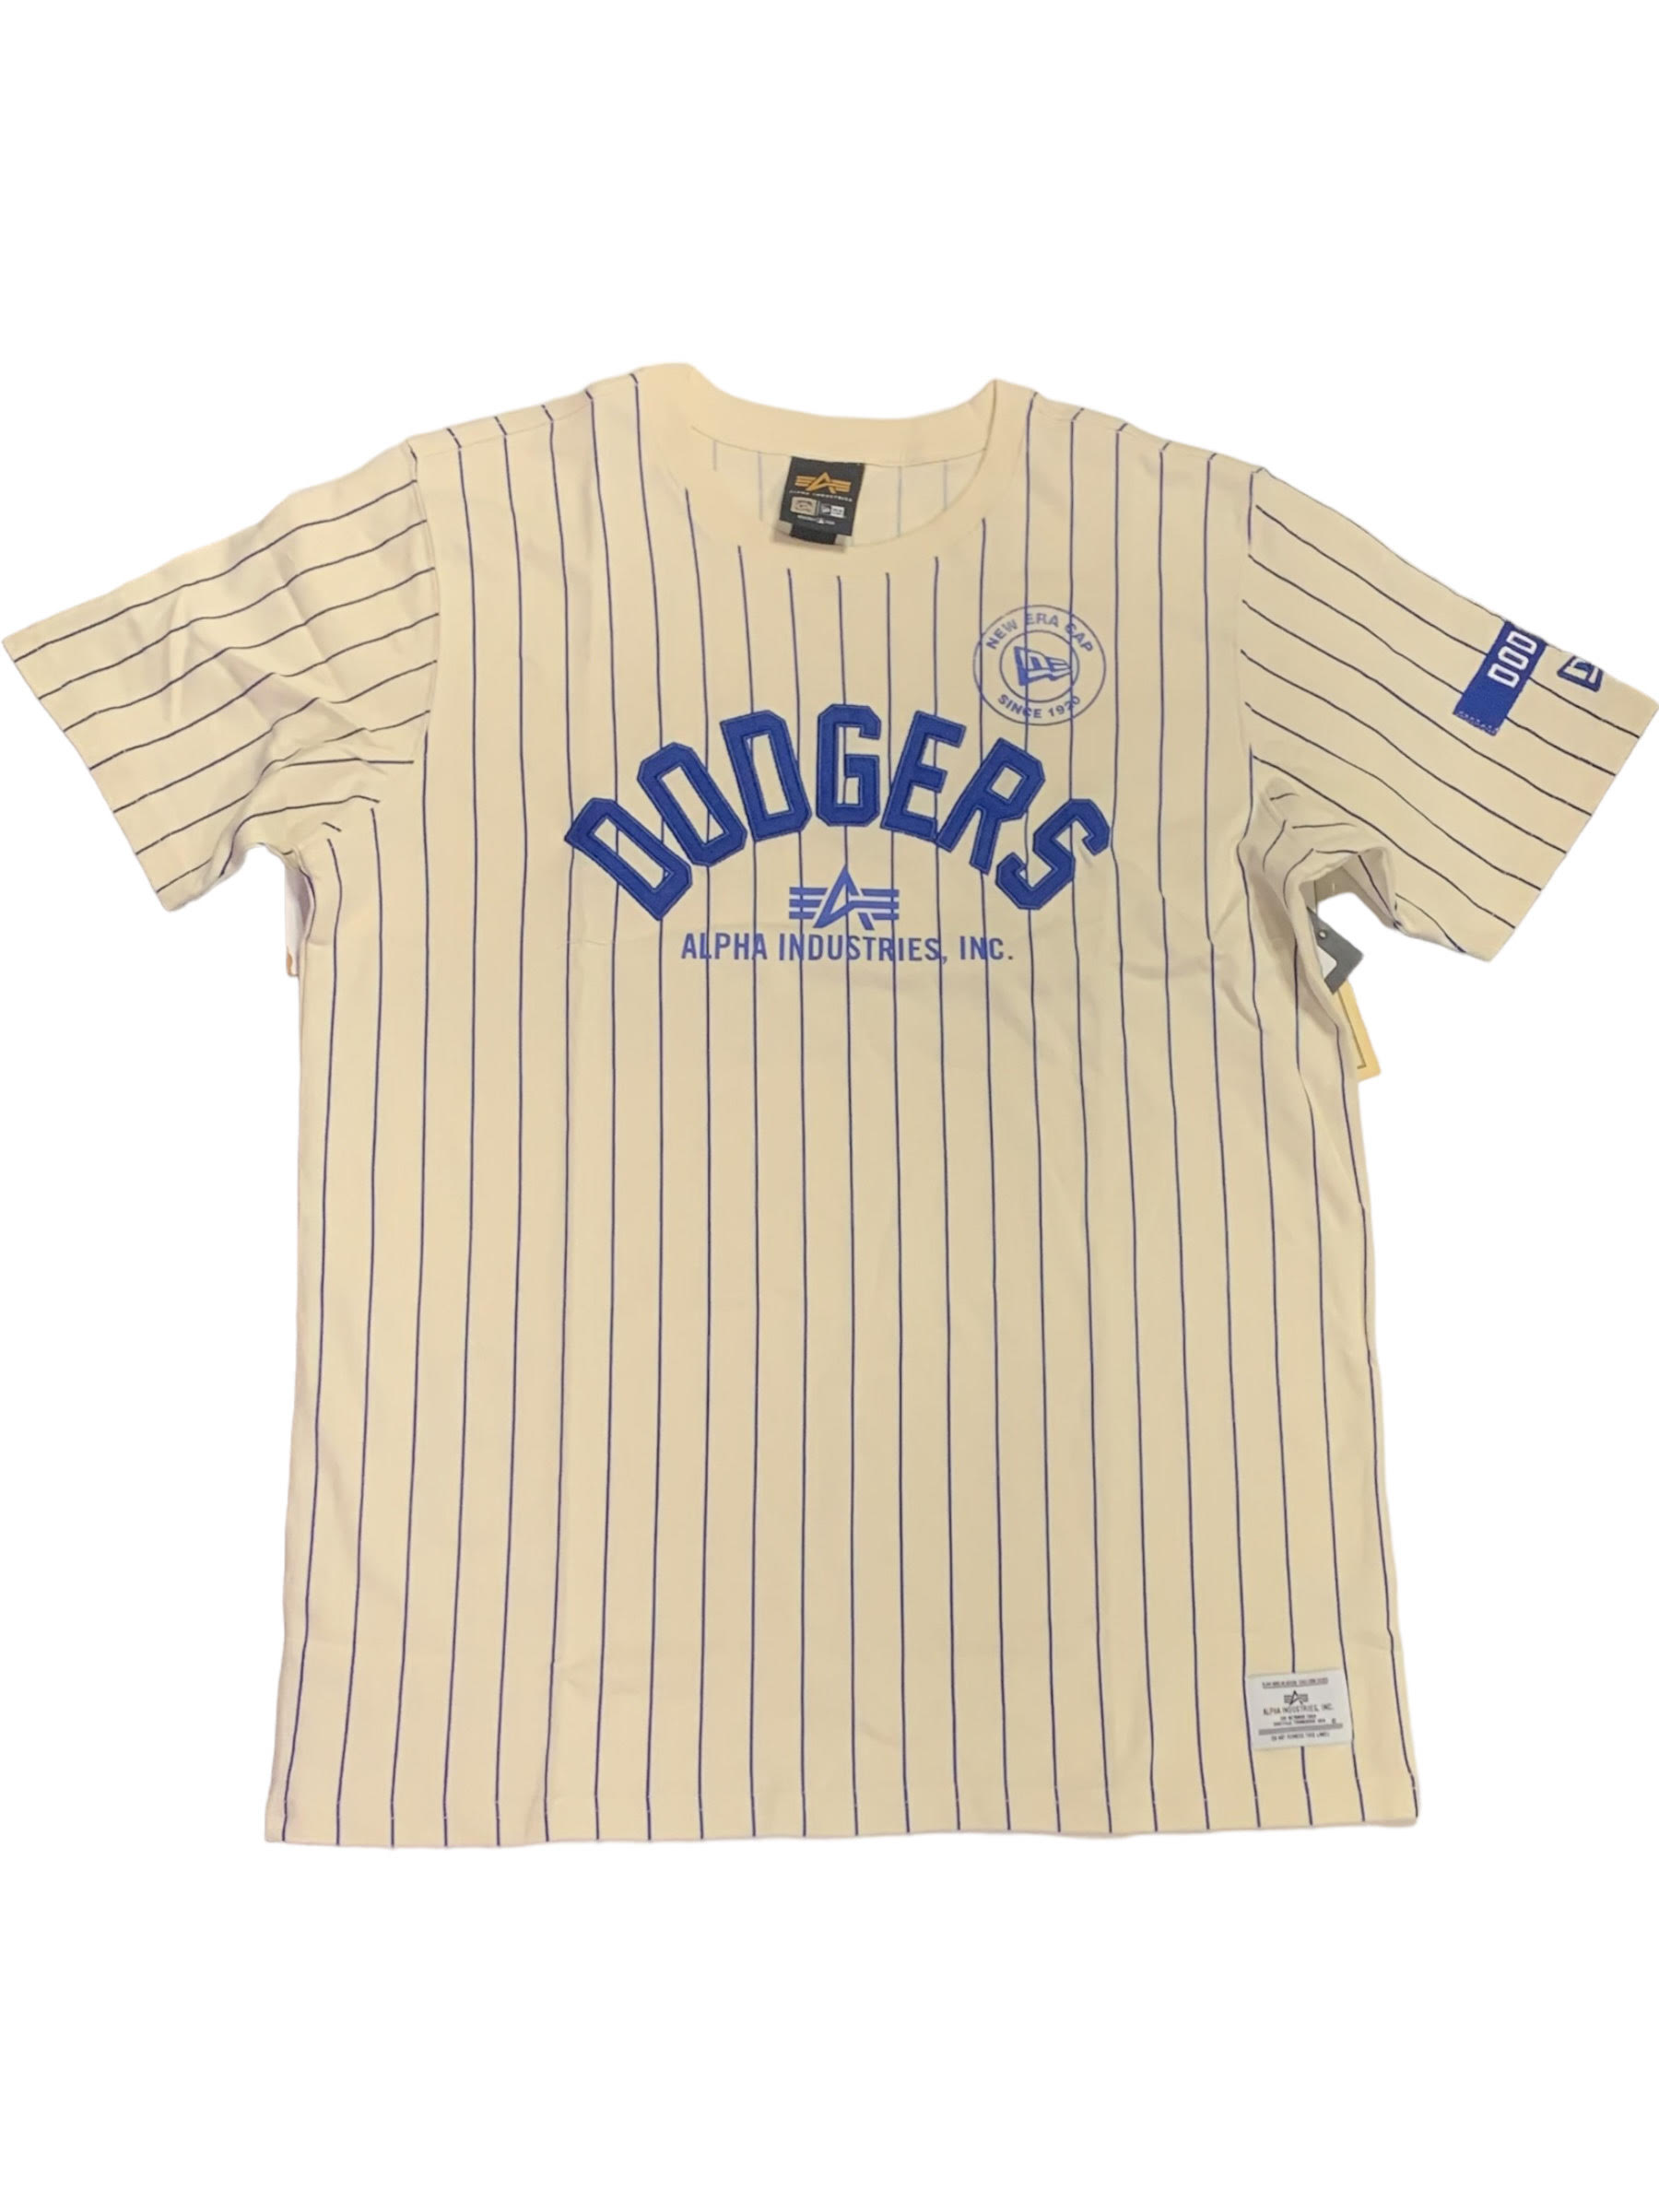 dodgers jersey mens nearby